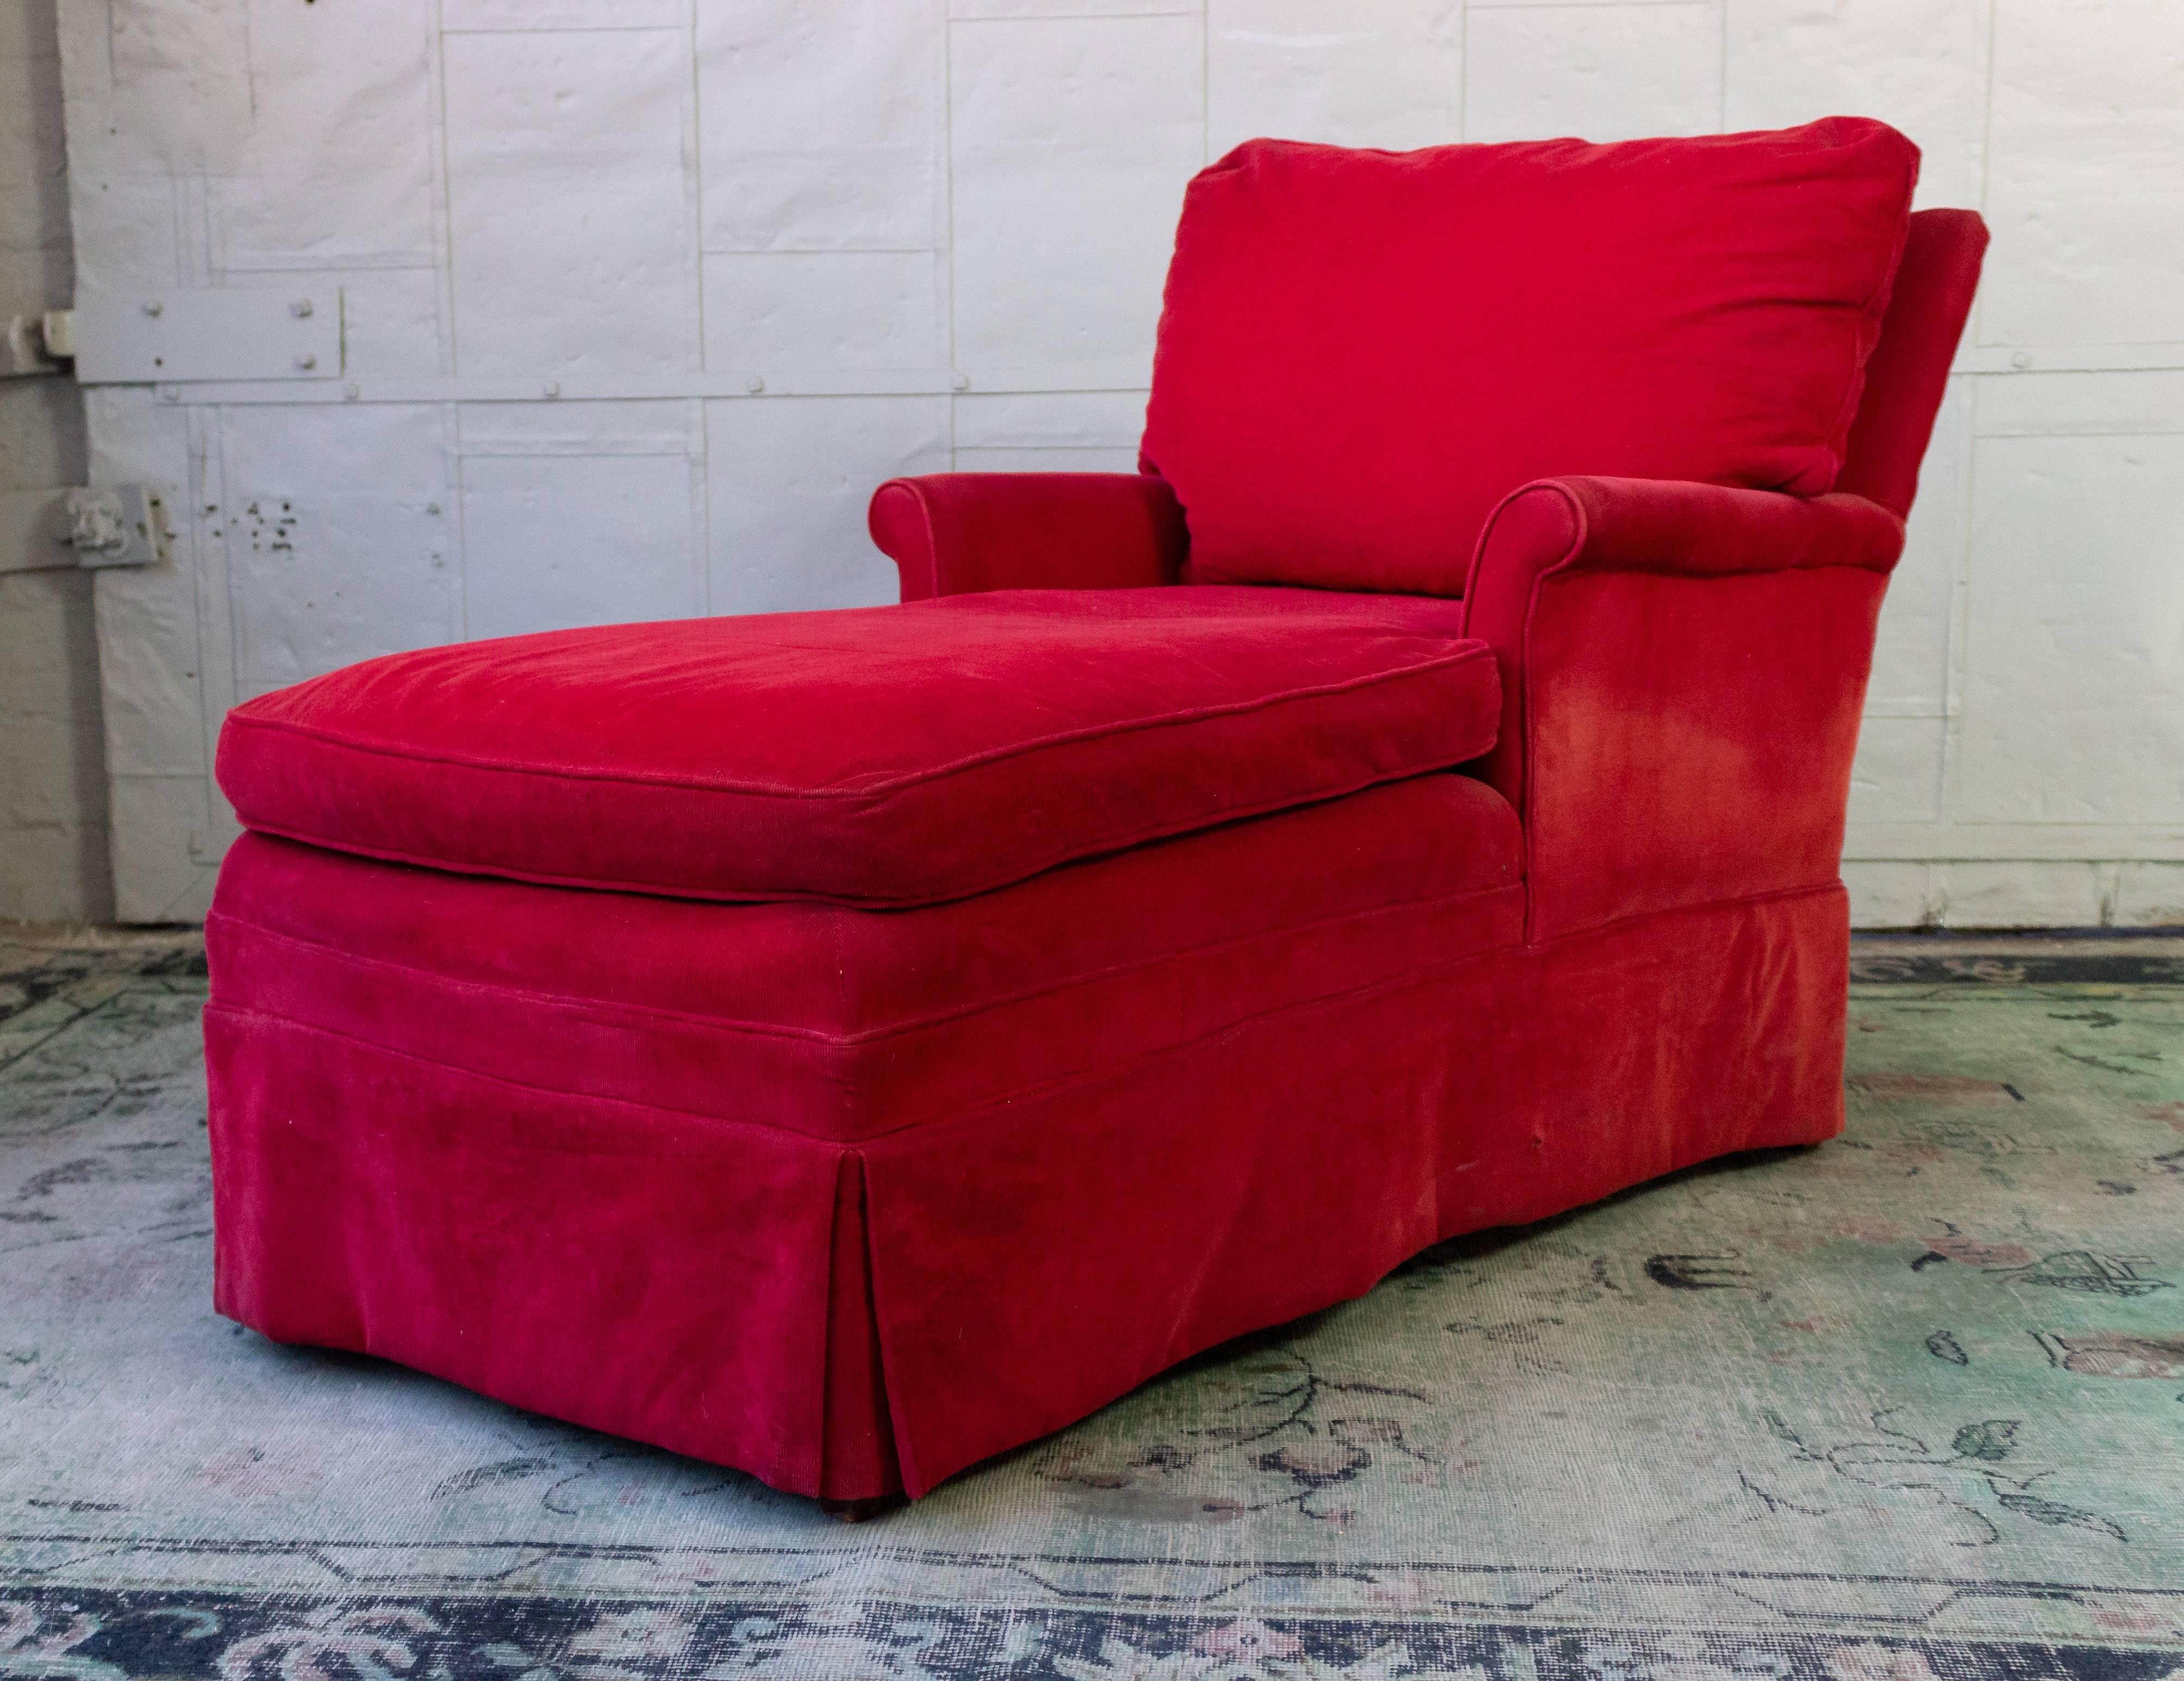 Mid-20th Century Small Ladie's Chaise Longue